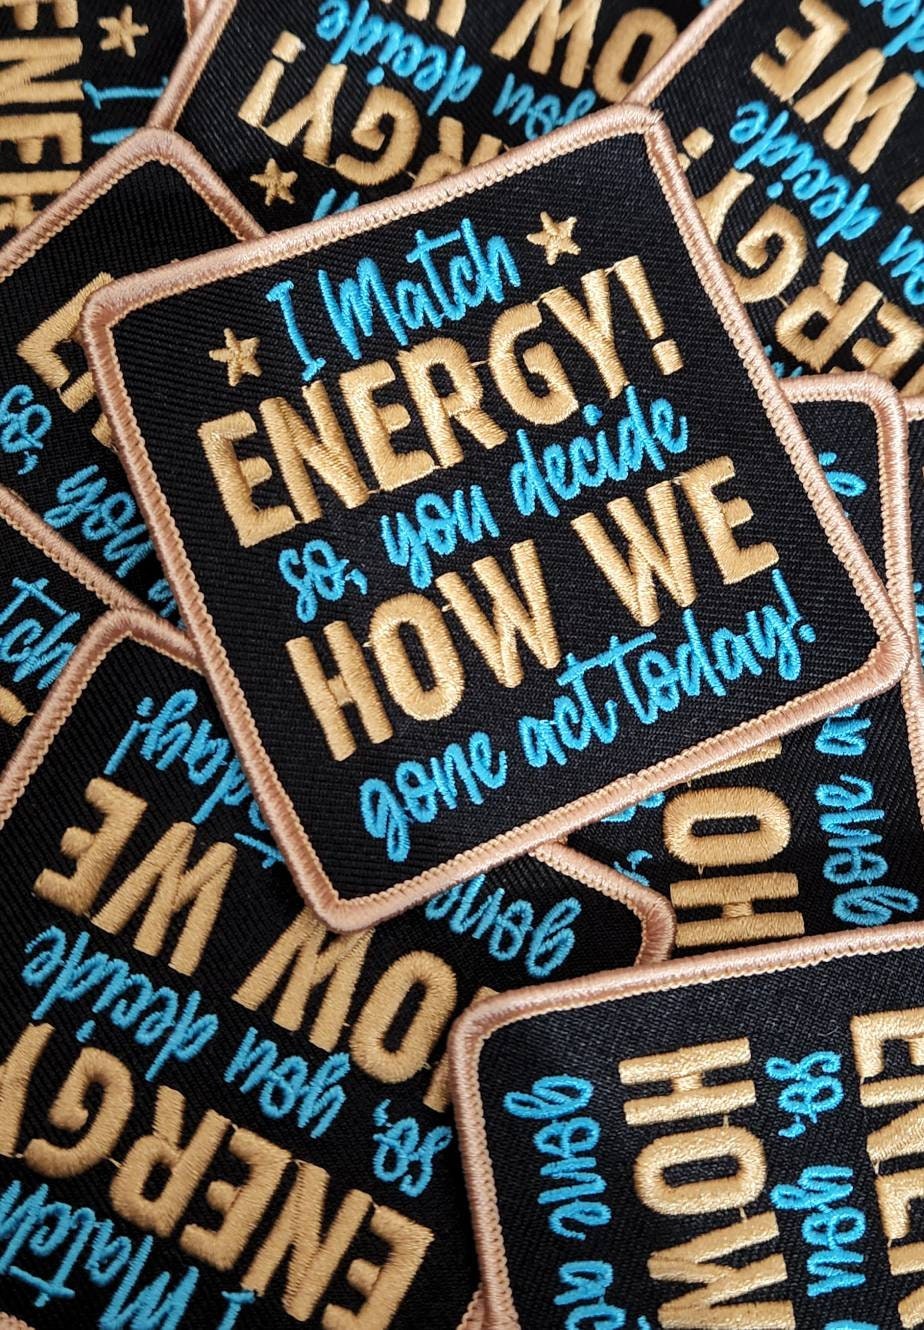 Cool Statement Patch "I Match Energy, You Decide How We Gone Act" Iron-on Patch, Size 3"x3", DIY Applique; Small Jacket Patch; Morale Patch